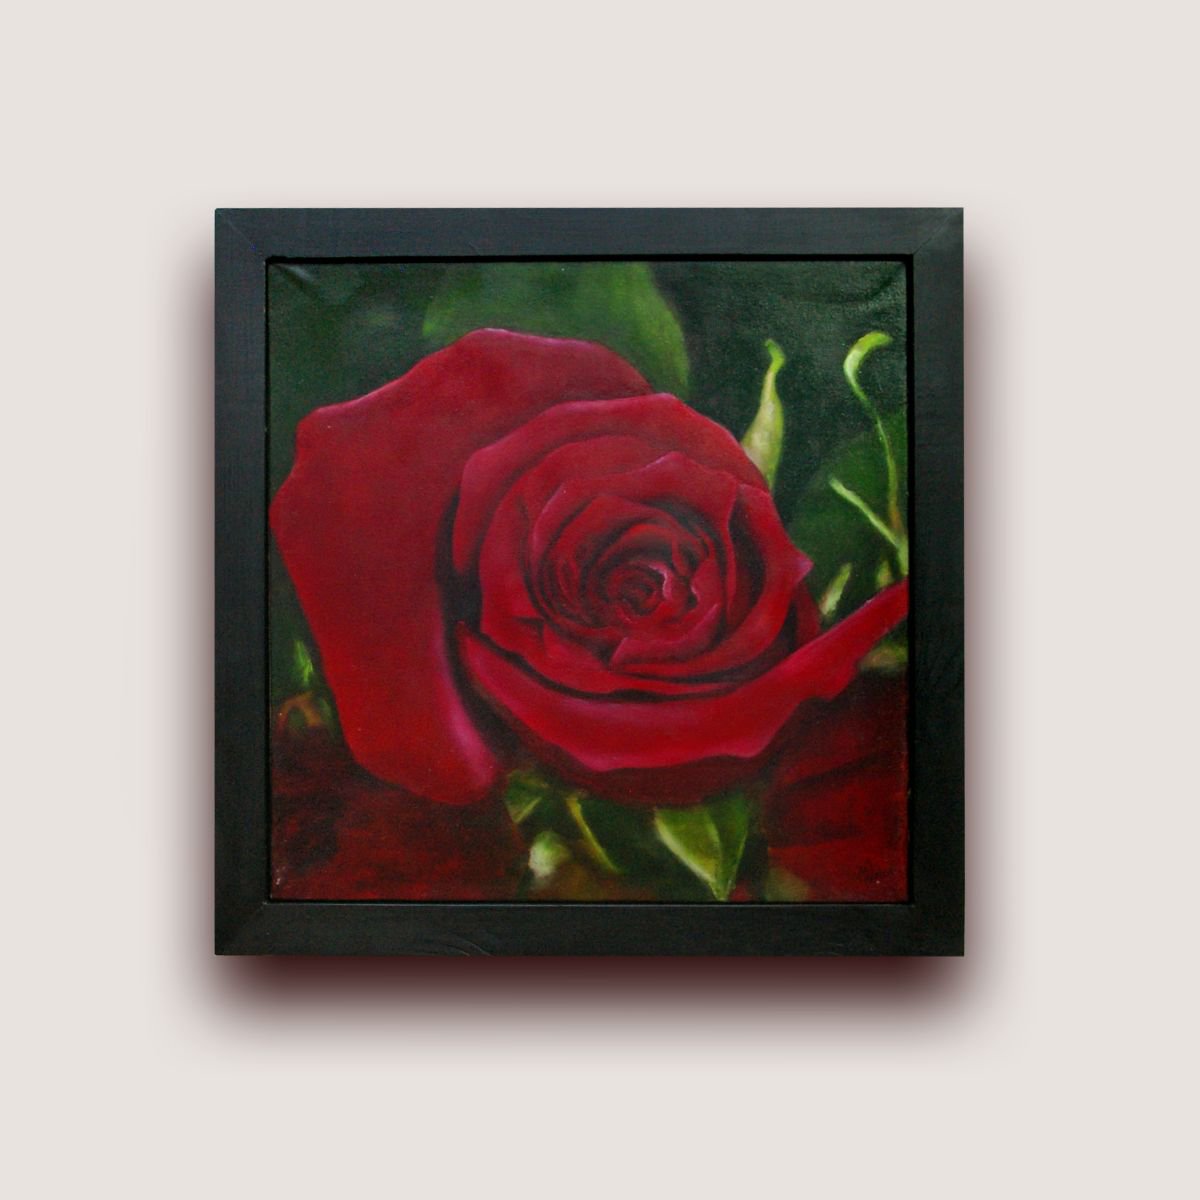 Red Rose - Realistic Still Life by Matthew Withey